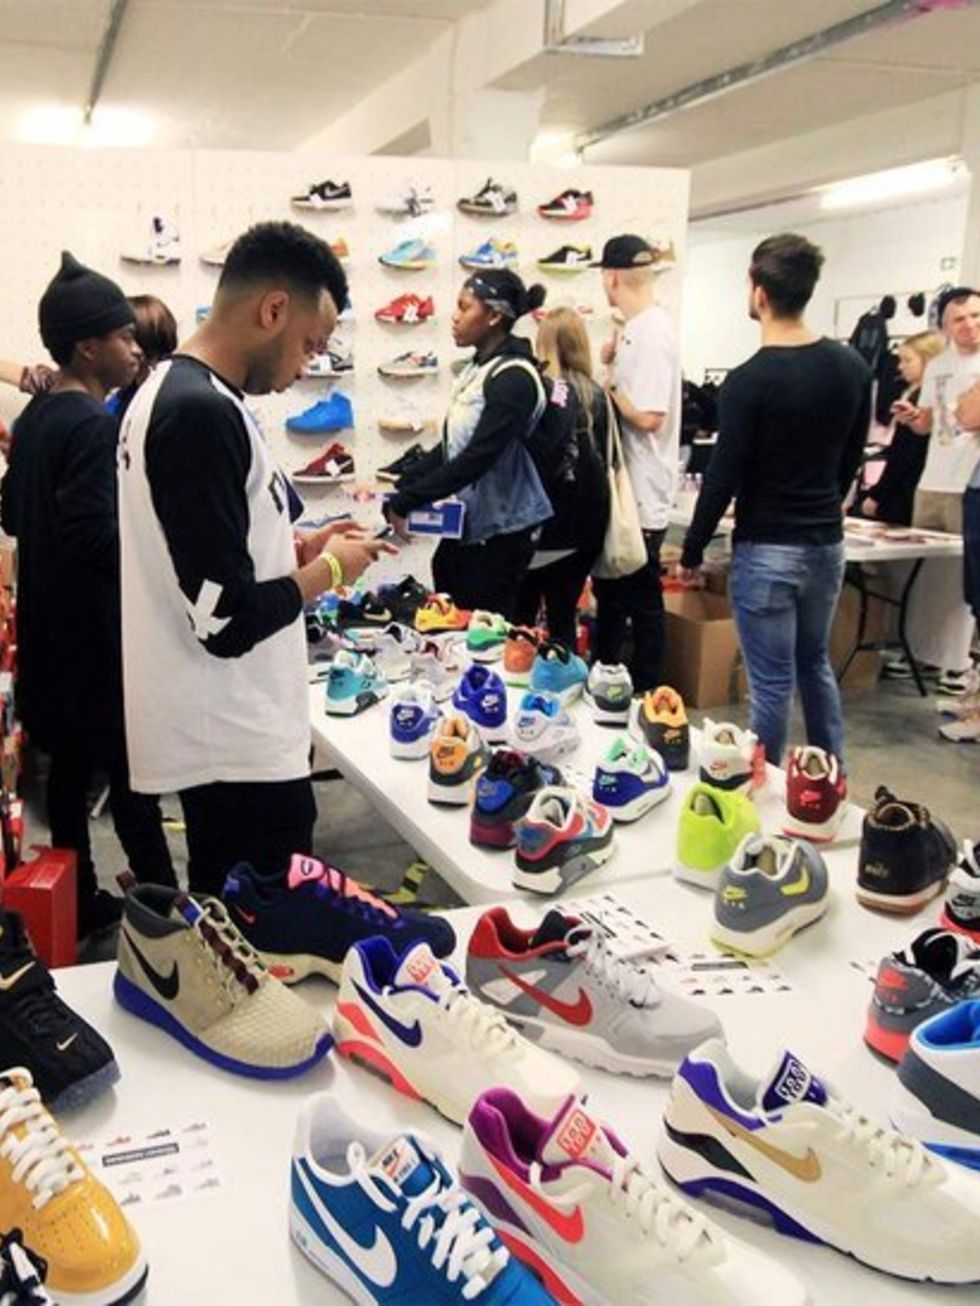 SHOPPING: Crepe City Sneaker Festival 

Trainers have been slowly growing in popularity in the fashion world over the past few seasons.

Once the preserve of street style sneaker freaks, trainers have now gone mainstream, and you can find the pick of the 